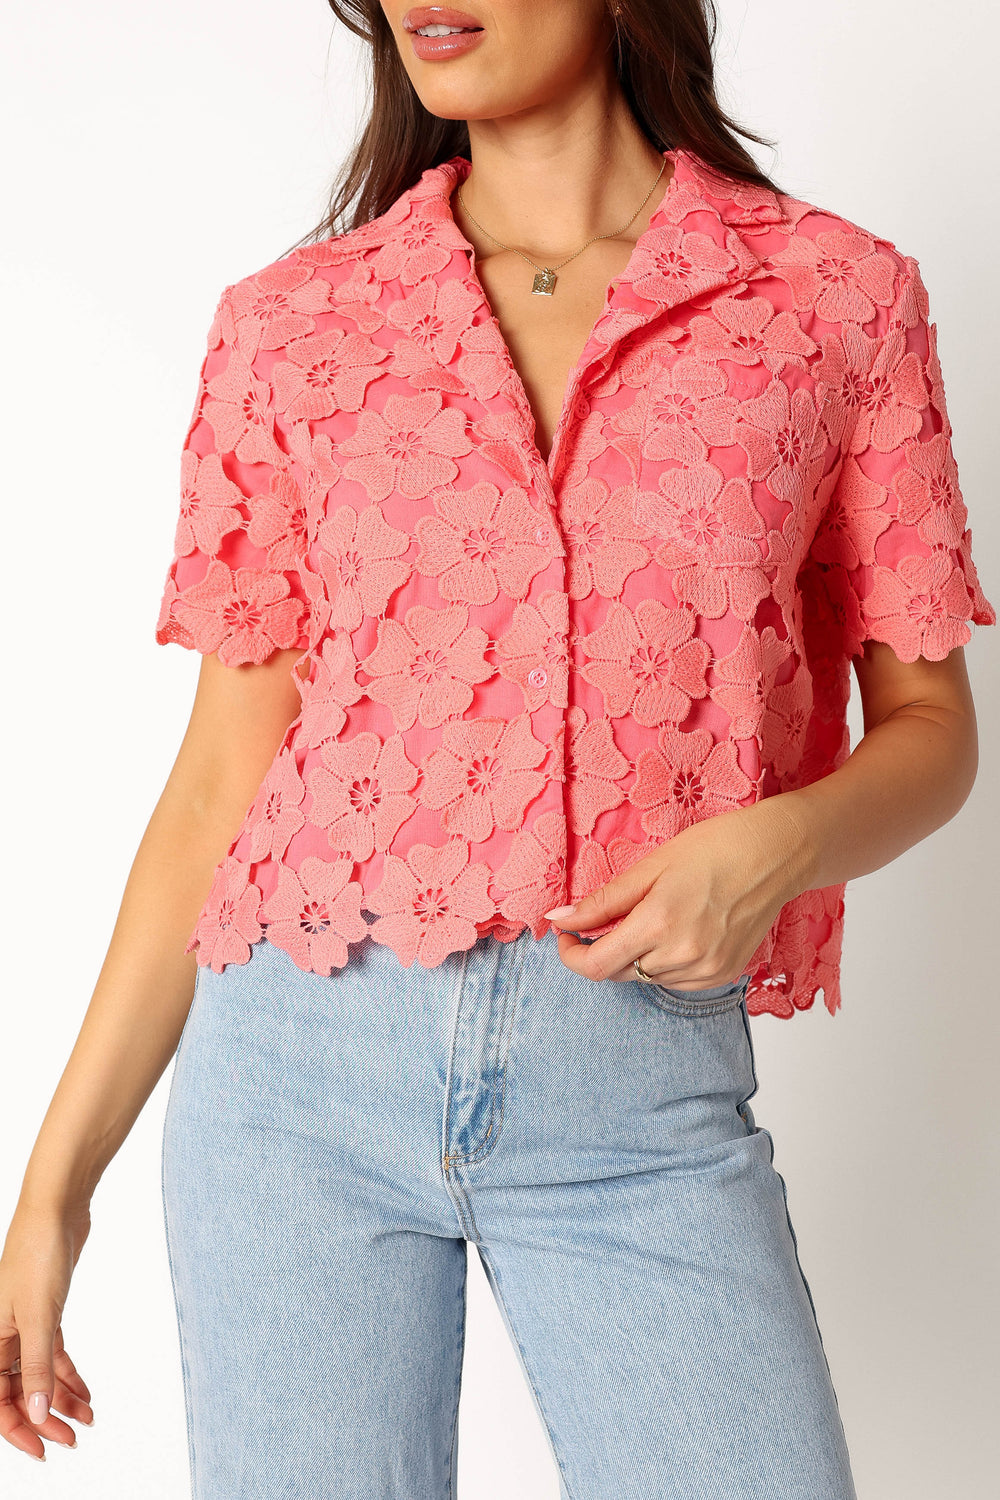 Petal and Pup USA TOPS Locale Shirt - Watermelon